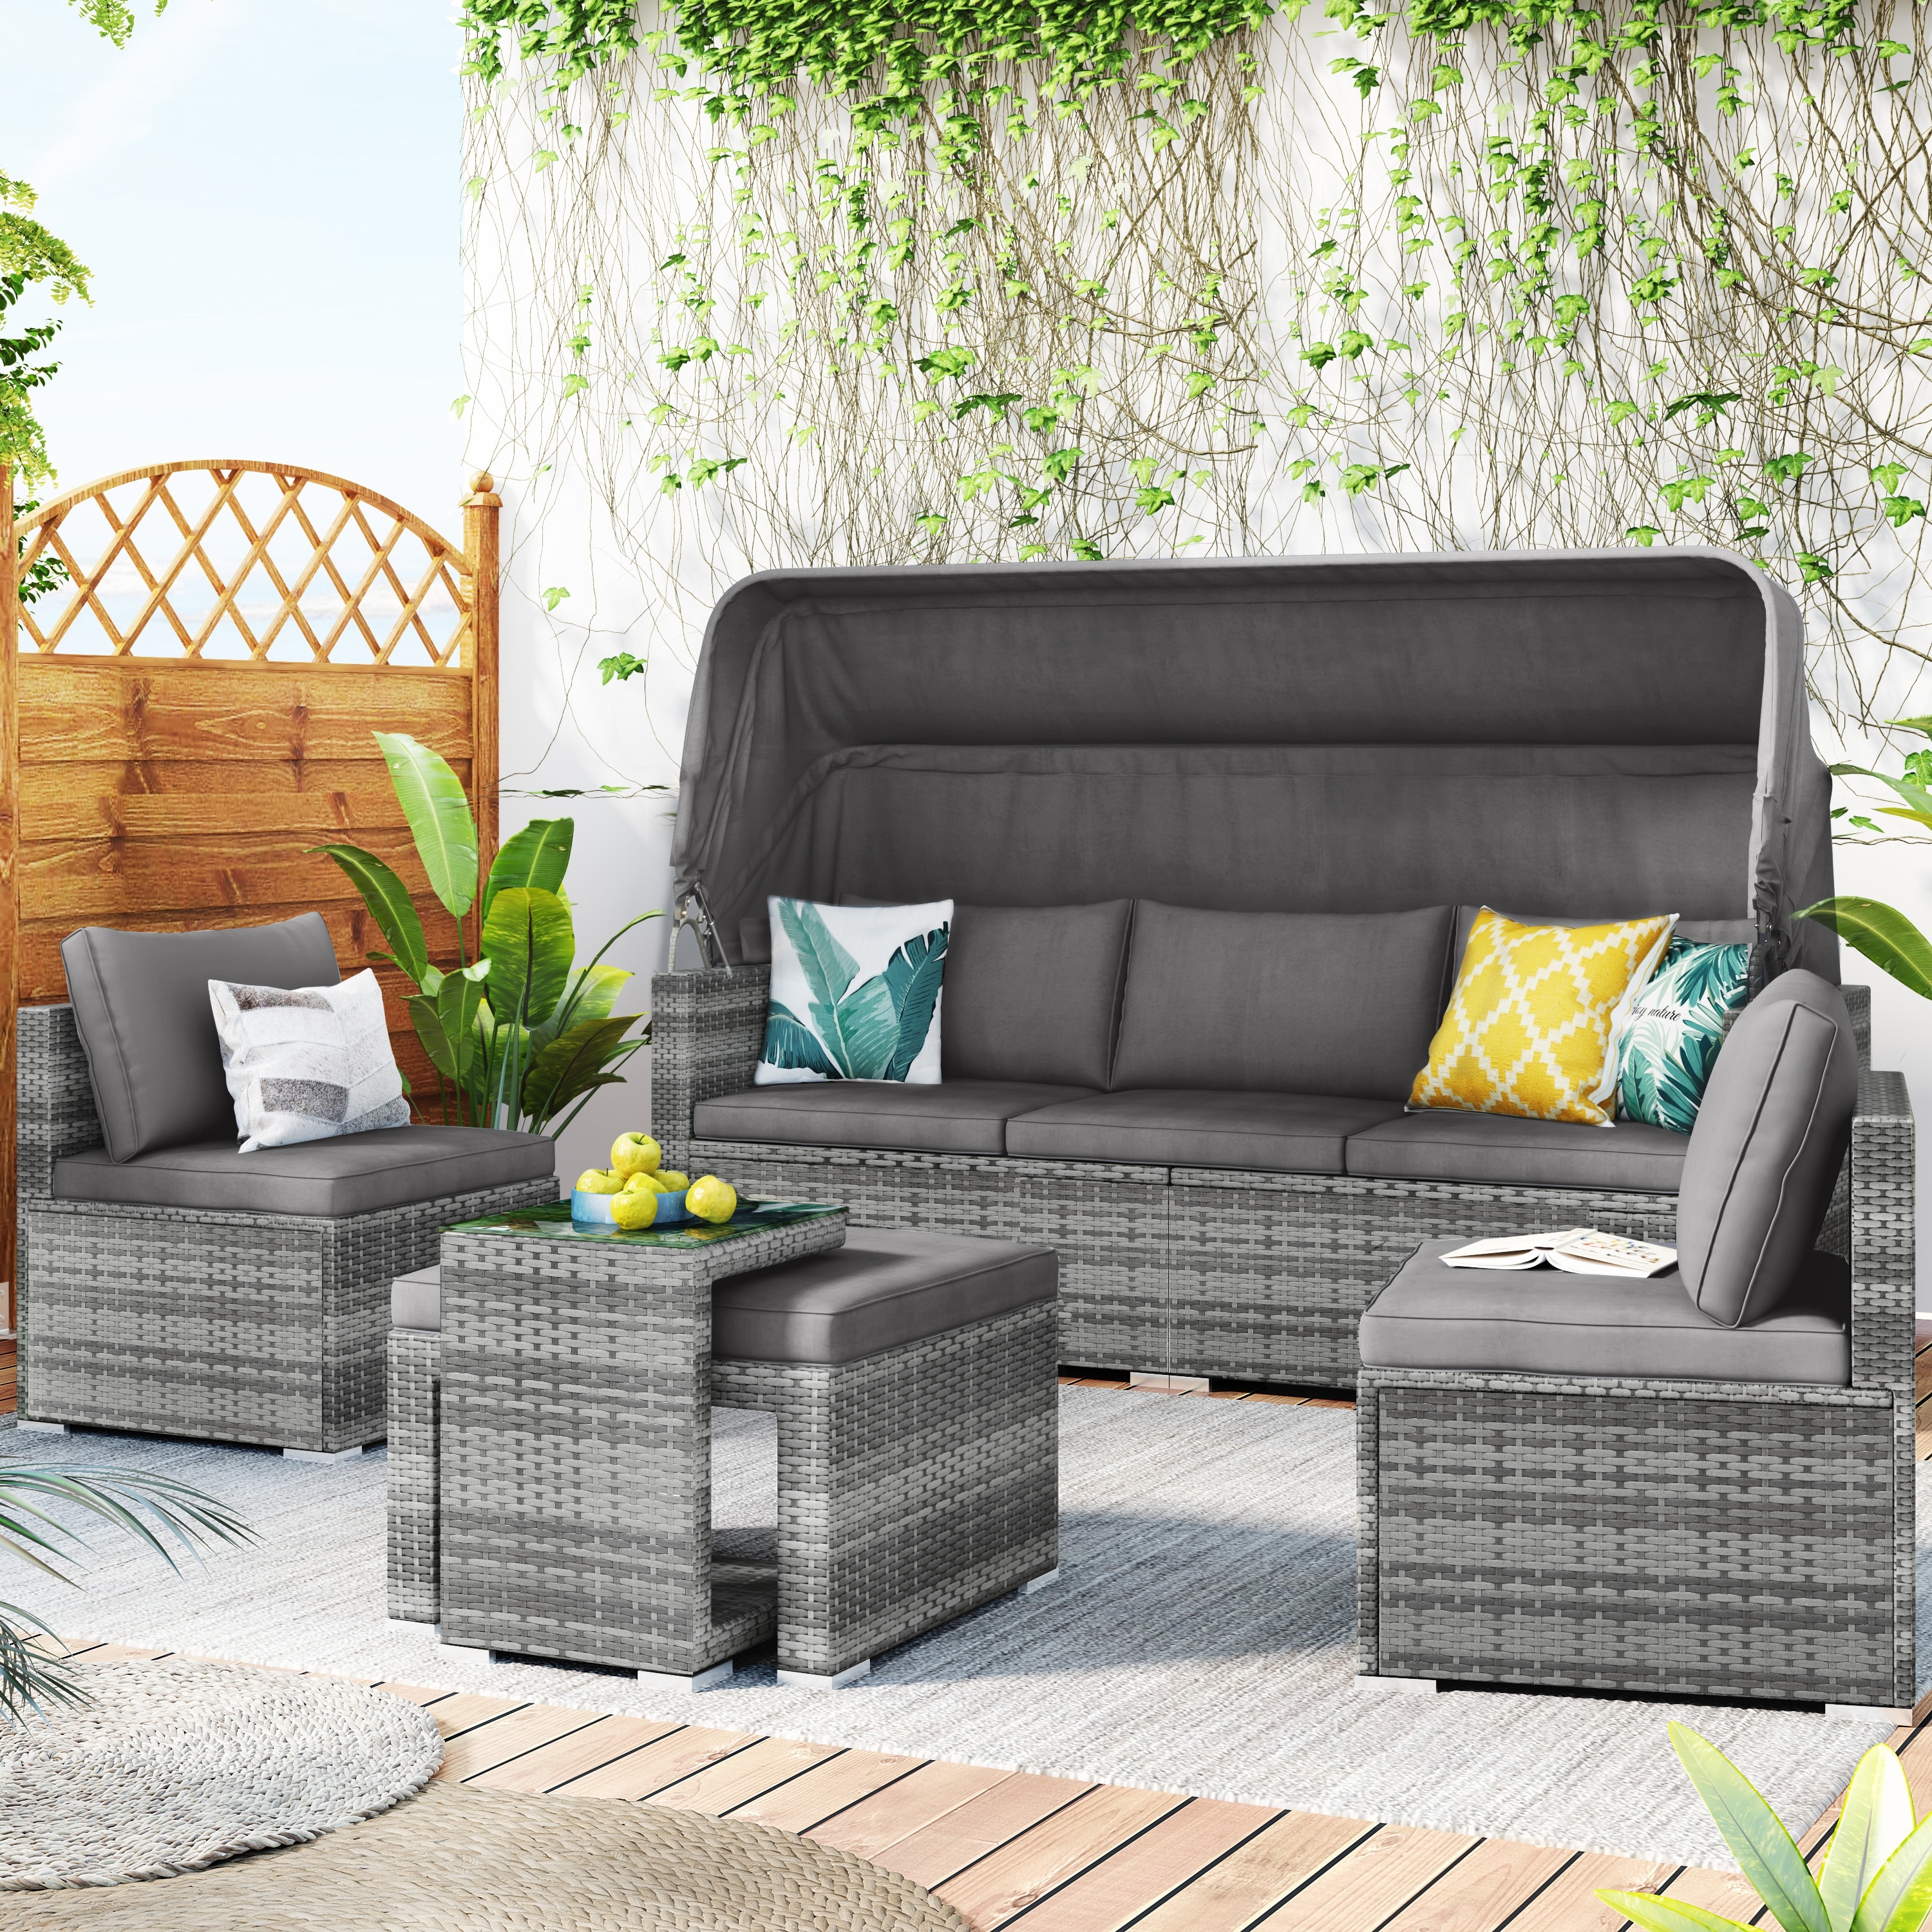 5 Pieces Outdoor Sectional Patio Rattan Sofa Set With Rattan Daybed And Canopy